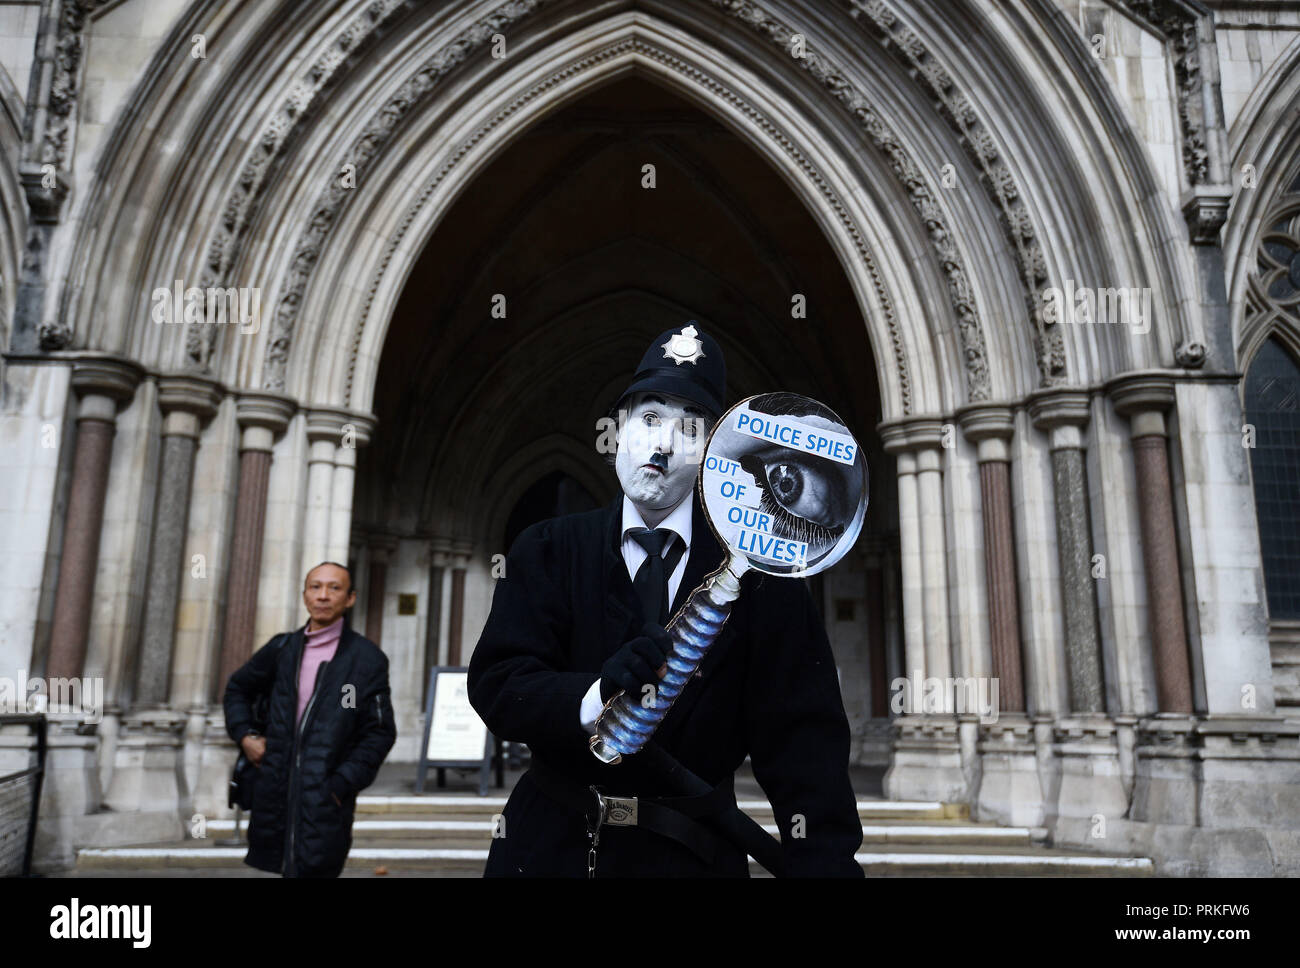 A demonstrator outside the Royal Courts of Justice, London, where an Investigatory Powers Tribunal is hearing the case of Kate Wilson who was deceived into a relationship by undercover police officer Mark Kennedy. Stock Photo